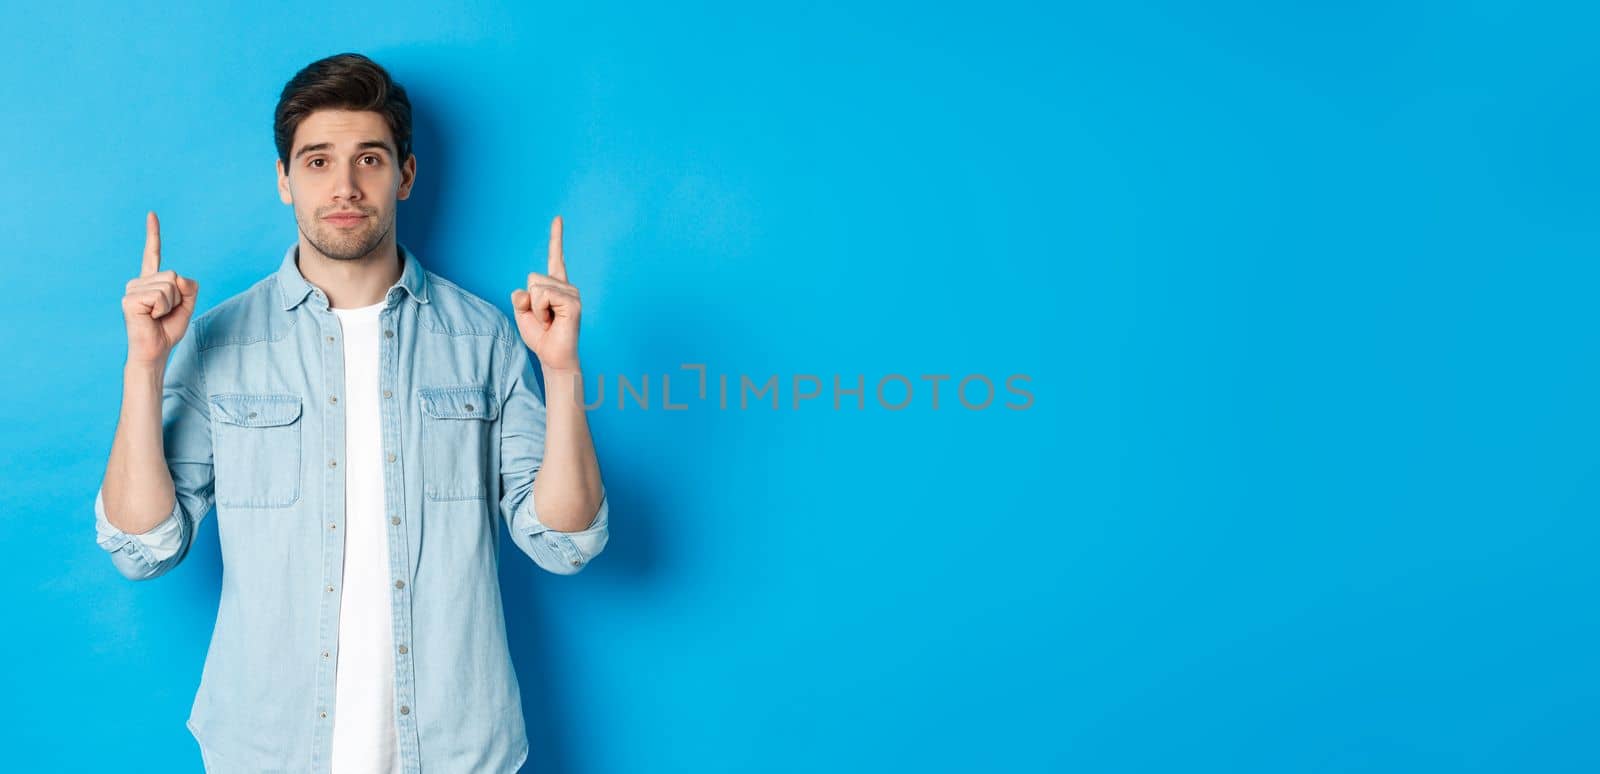 Image of calm handsome man showing you promo offer, pointing fingers up at copy space, standing against blue background.